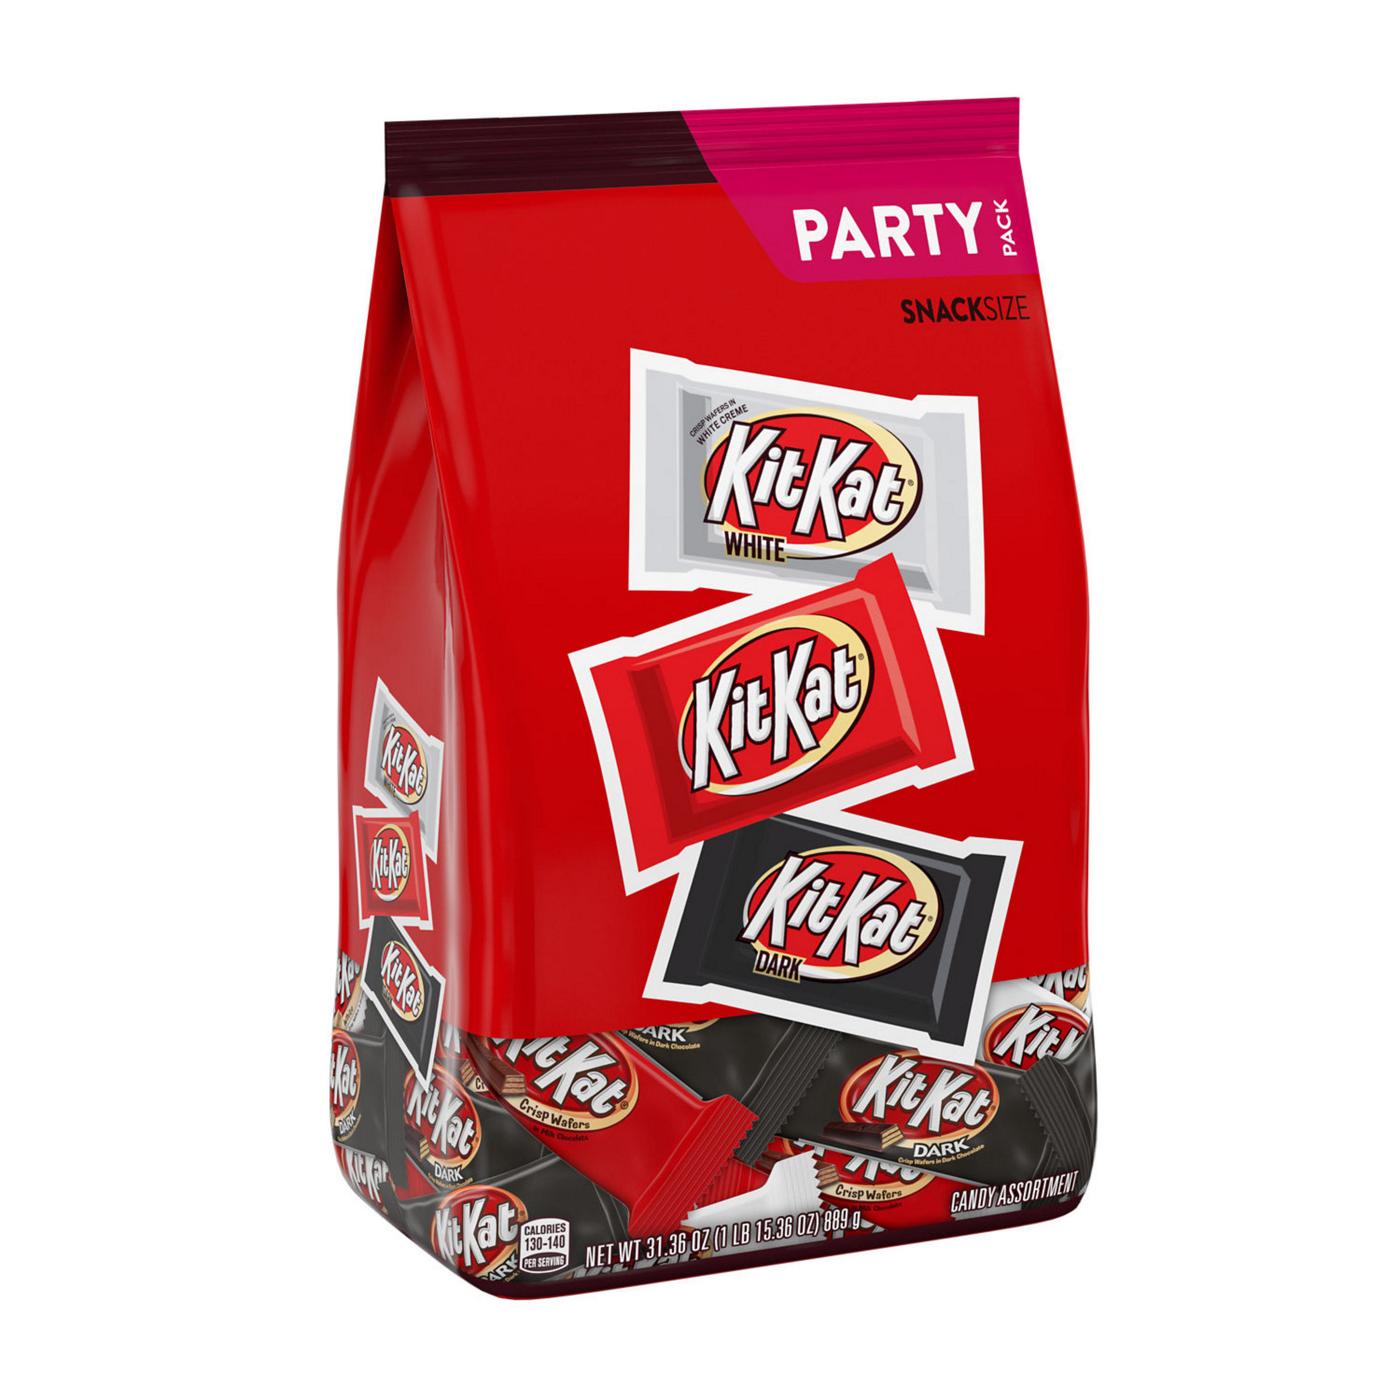 Kit Kat Snack Size Assortment Bars Party Pack; image 4 of 4